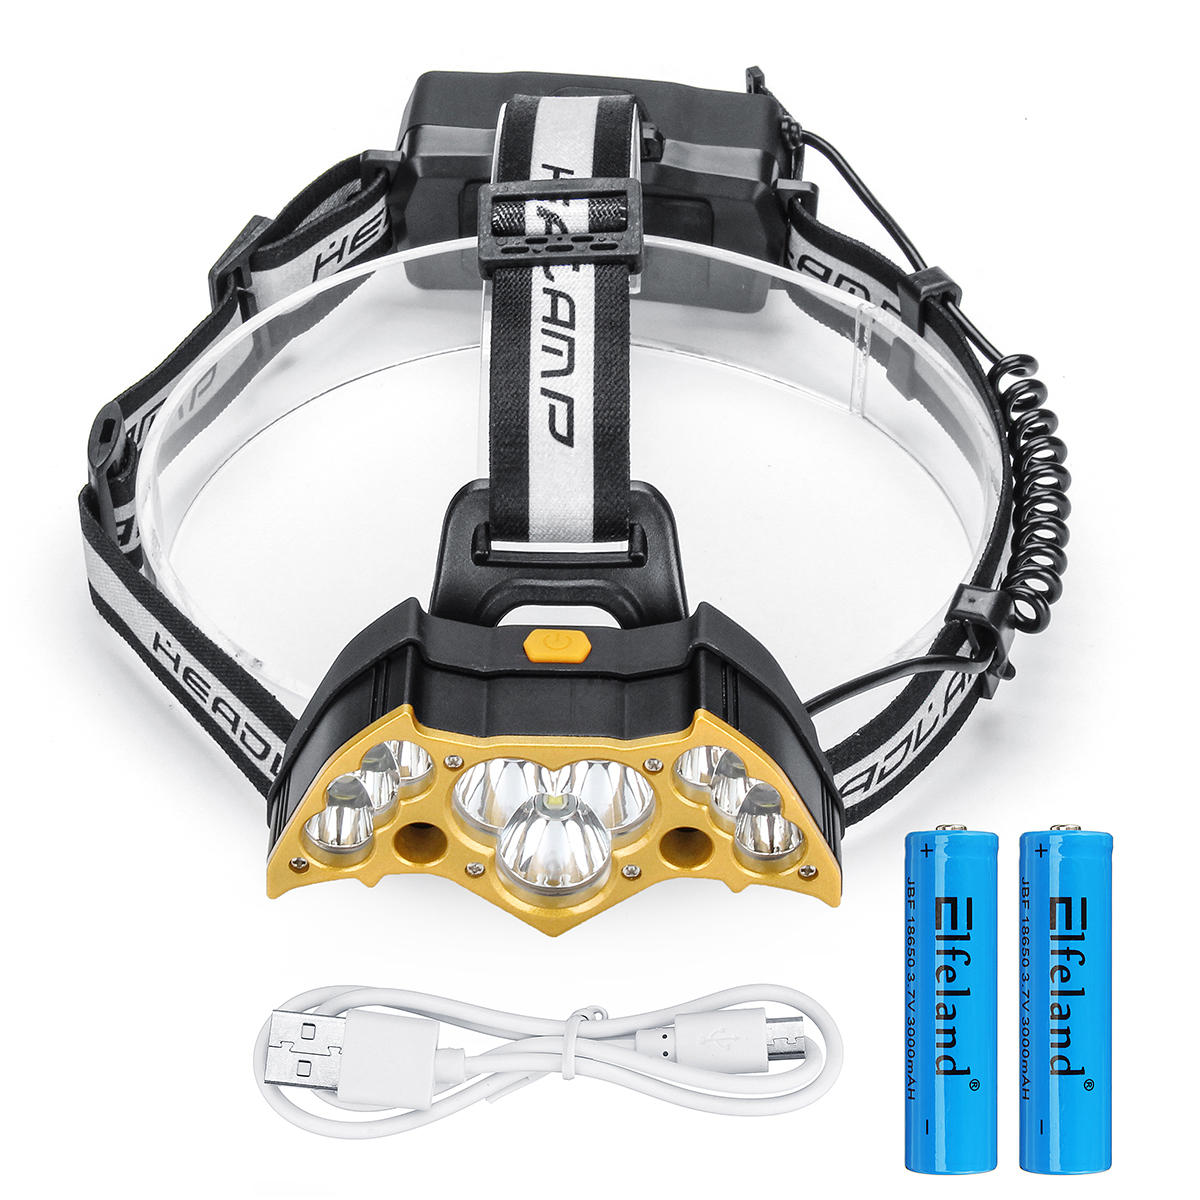 Elfeland 5000LM Headlamp with 18650 Batteries USB Rechargeable Camping Lamp Hunting Cycling Flashlight